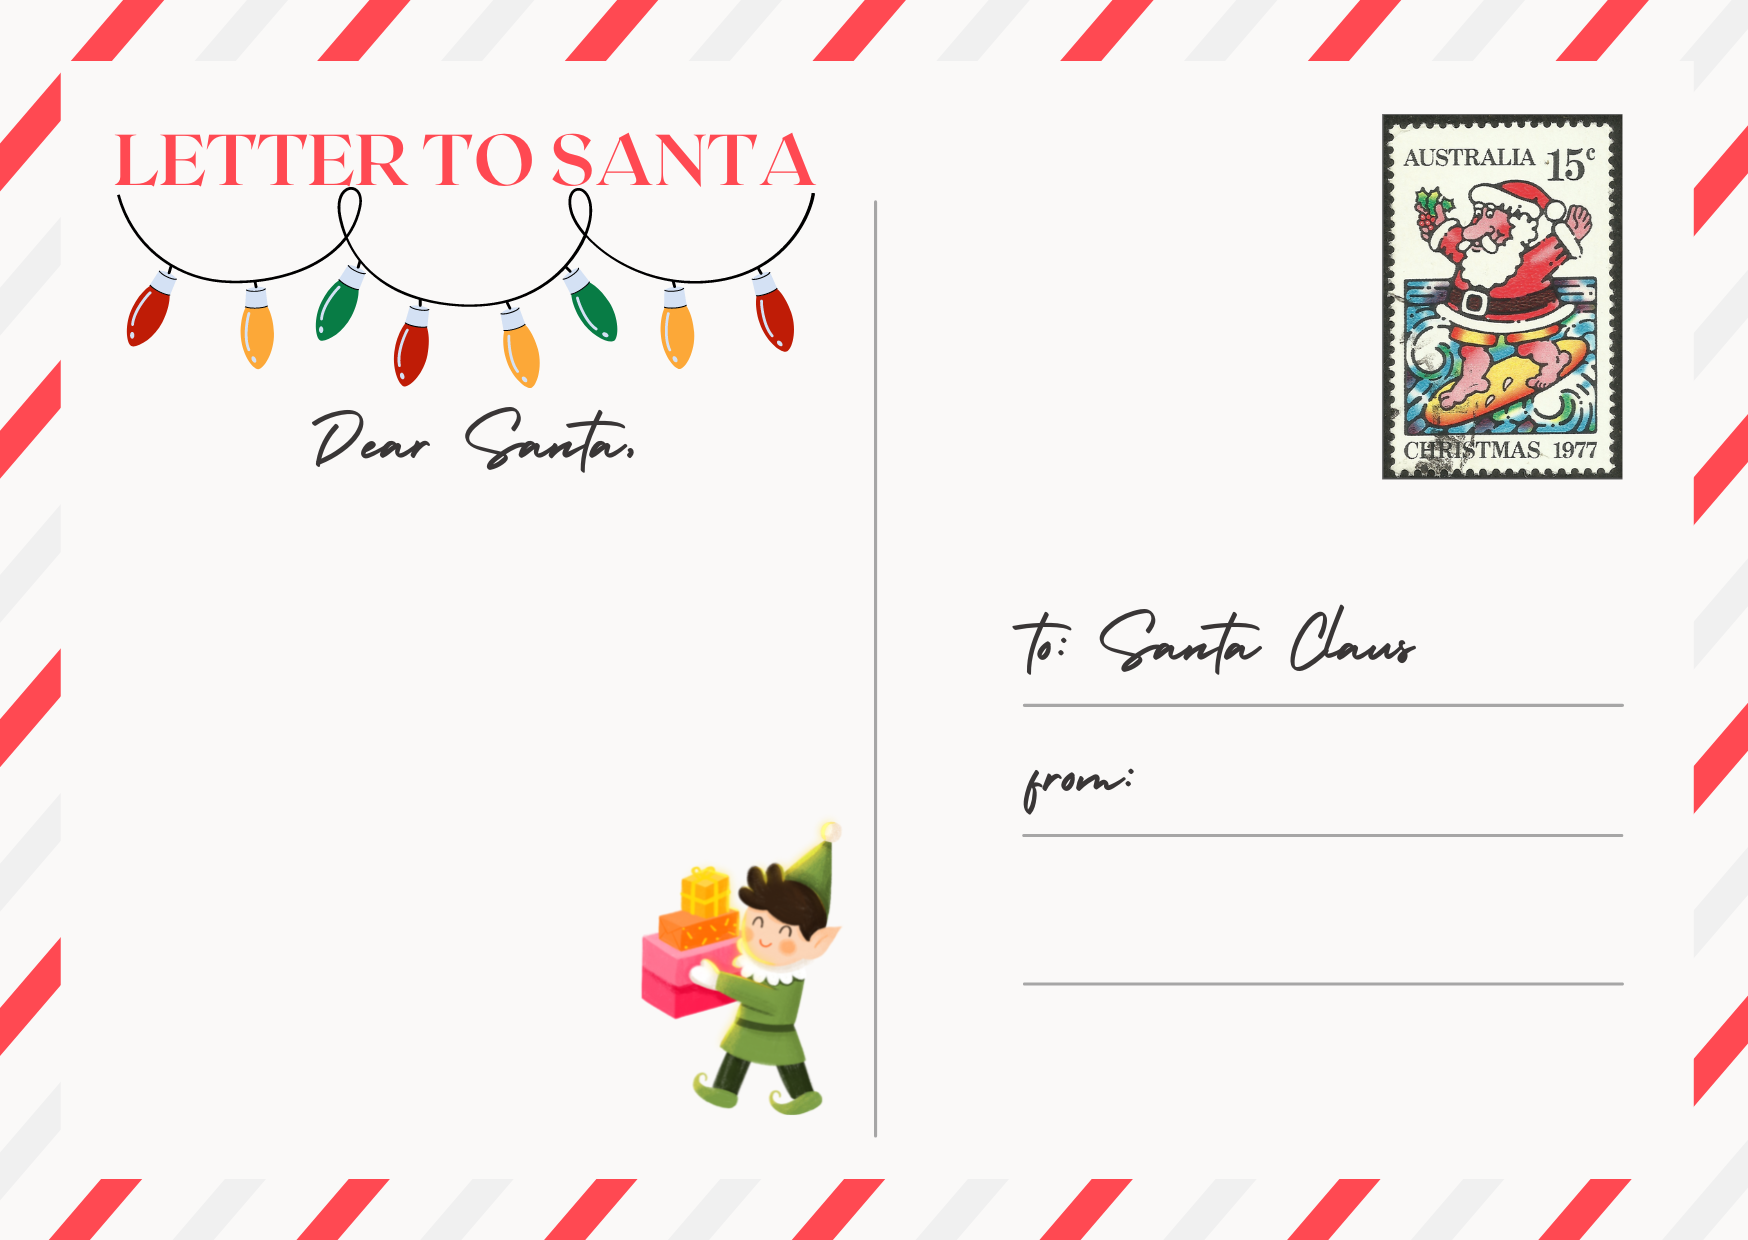 Write a Letter to Santa to enter a competition to win a subscription to Letter Box